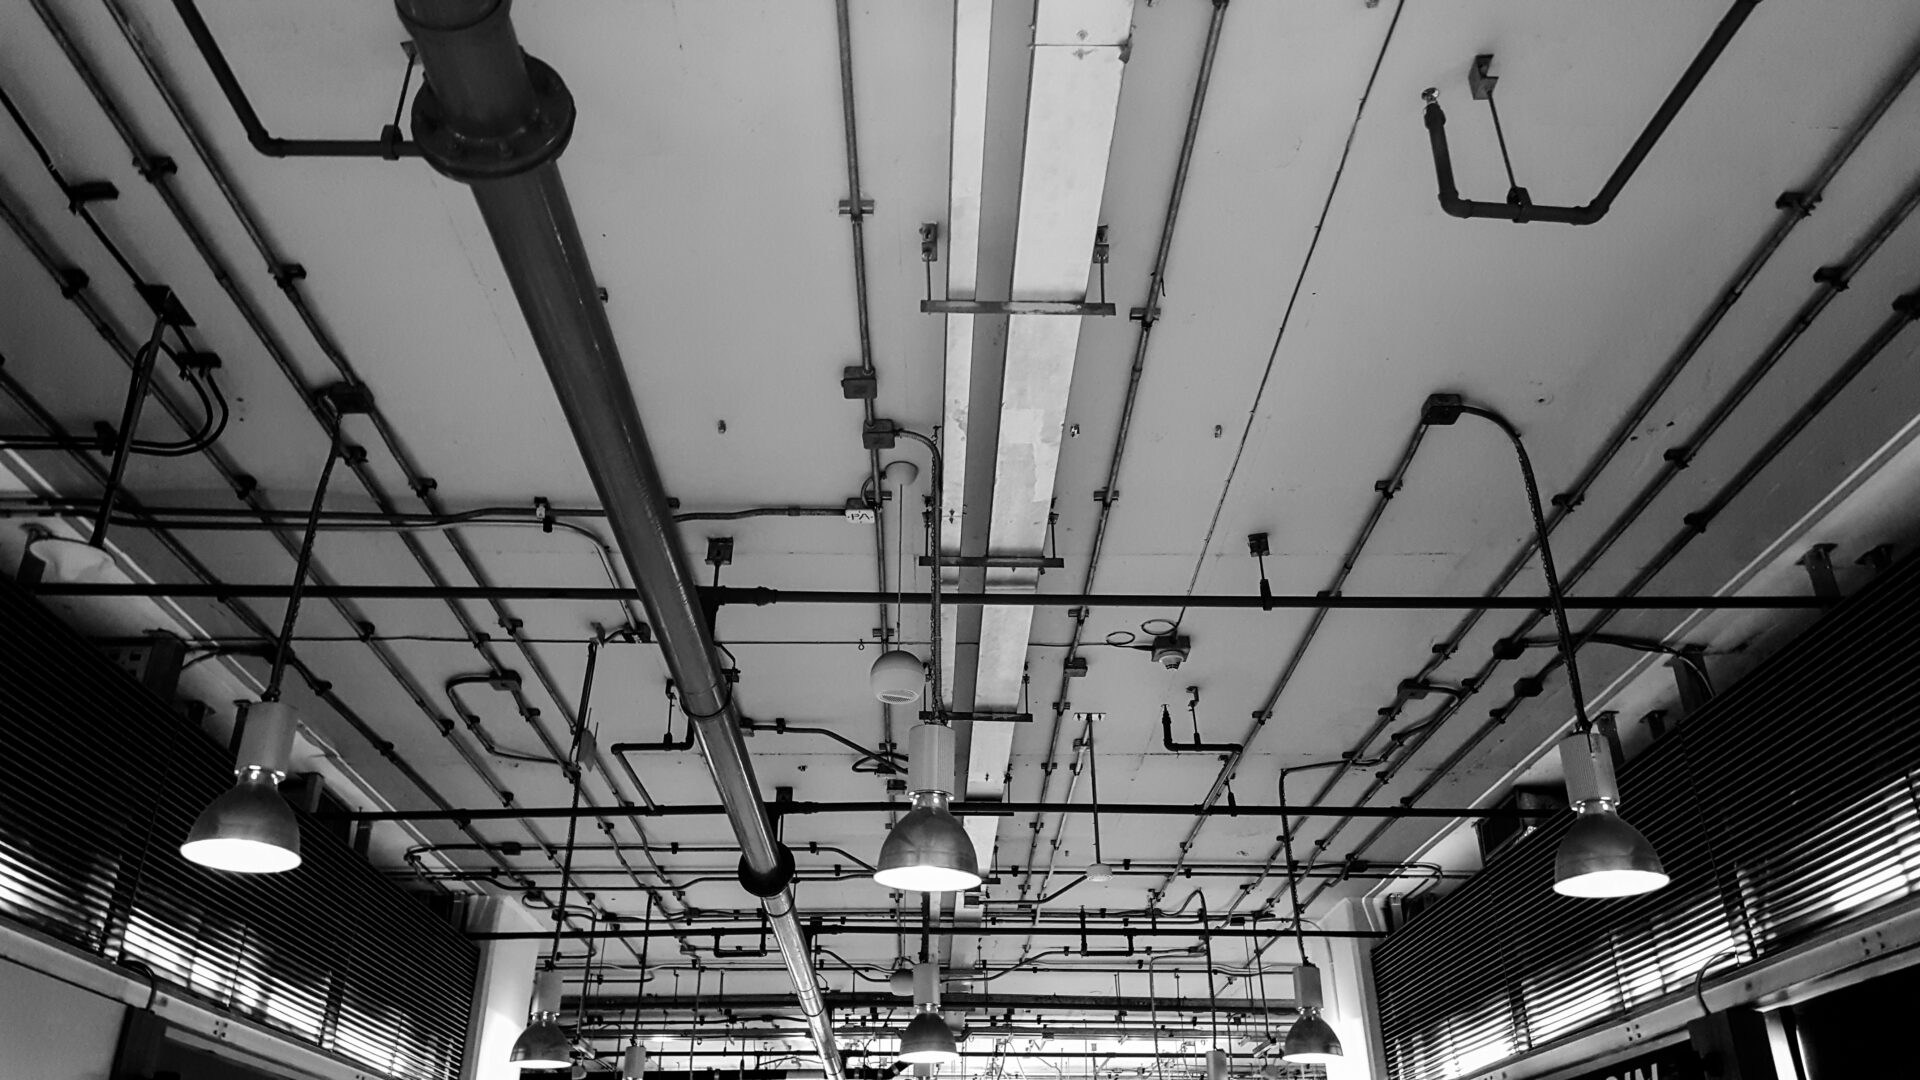 A black and white photo of pipes in an industrial building.